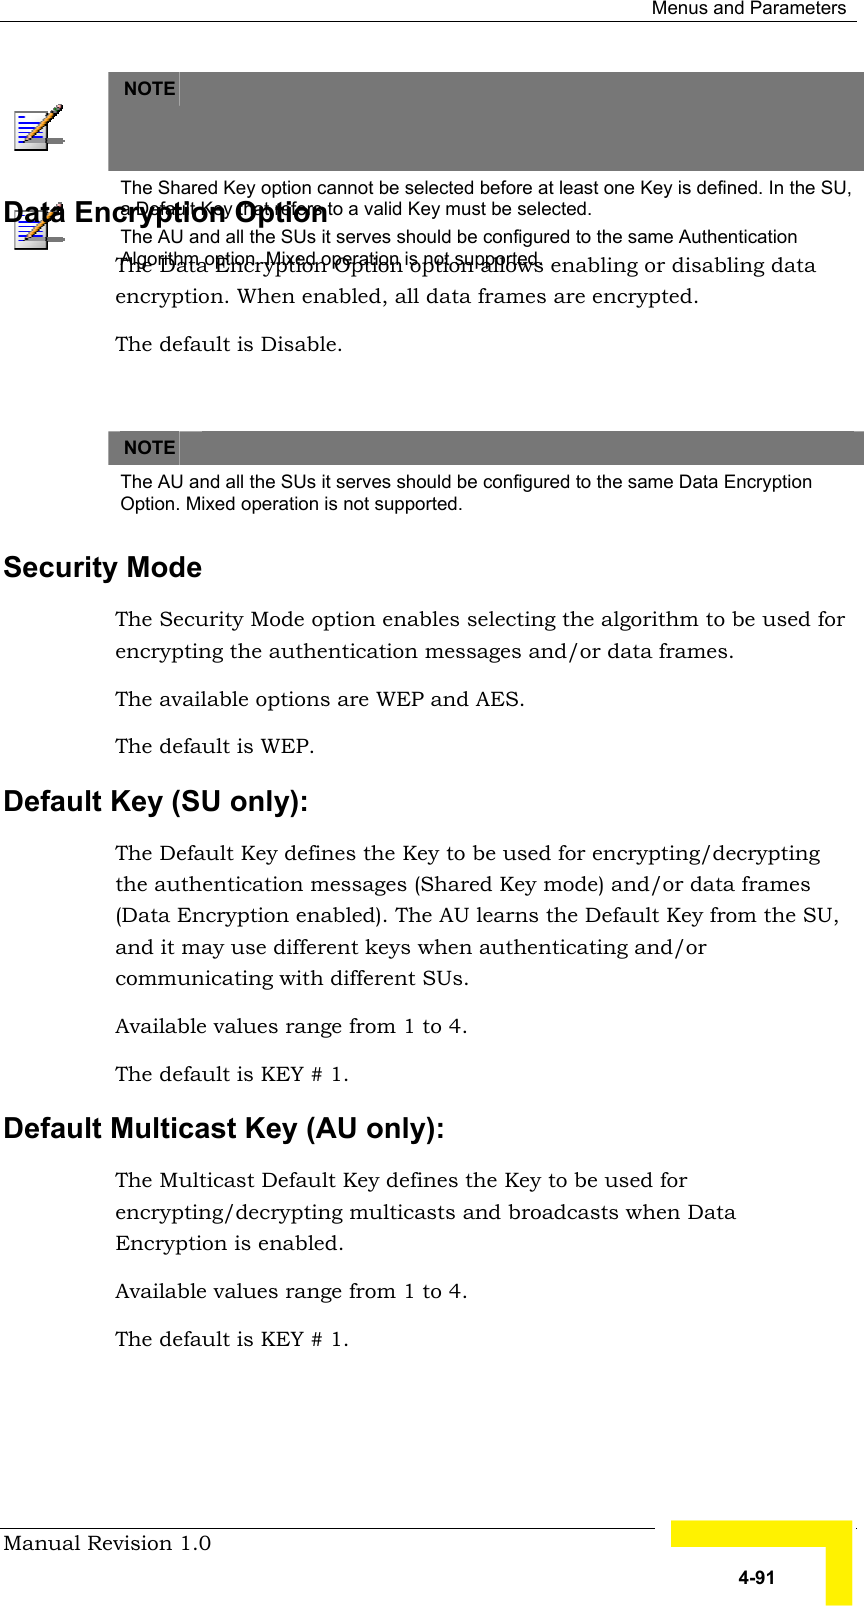  Menus and Parameters Manual Revision 1.0   4-91  NOTE    The Shared Key option cannot be selected before at least one Key is defined. In the SU, a Default Key that refers to a valid Key must be selected. The AU and all the SUs it serves should be configured to the same Authentication Algorithm option. Mixed operation is not supported. Data Encryption Option The Data Encryption Option option allows enabling or disabling data encryption. When enabled, all data frames are encrypted. The default is Disable.    NOTE   The AU and all the SUs it serves should be configured to the same Data Encryption Option. Mixed operation is not supported. Security Mode The Security Mode option enables selecting the algorithm to be used for encrypting the authentication messages and/or data frames. The available options are WEP and AES. The default is WEP.  Default Key (SU only):  The Default Key defines the Key to be used for encrypting/decrypting the authentication messages (Shared Key mode) and/or data frames (Data Encryption enabled). The AU learns the Default Key from the SU, and it may use different keys when authenticating and/or communicating with different SUs.   Available values range from 1 to 4. The default is KEY # 1. Default Multicast Key (AU only):  The Multicast Default Key defines the Key to be used for encrypting/decrypting multicasts and broadcasts when Data Encryption is enabled. Available values range from 1 to 4. The default is KEY # 1. 